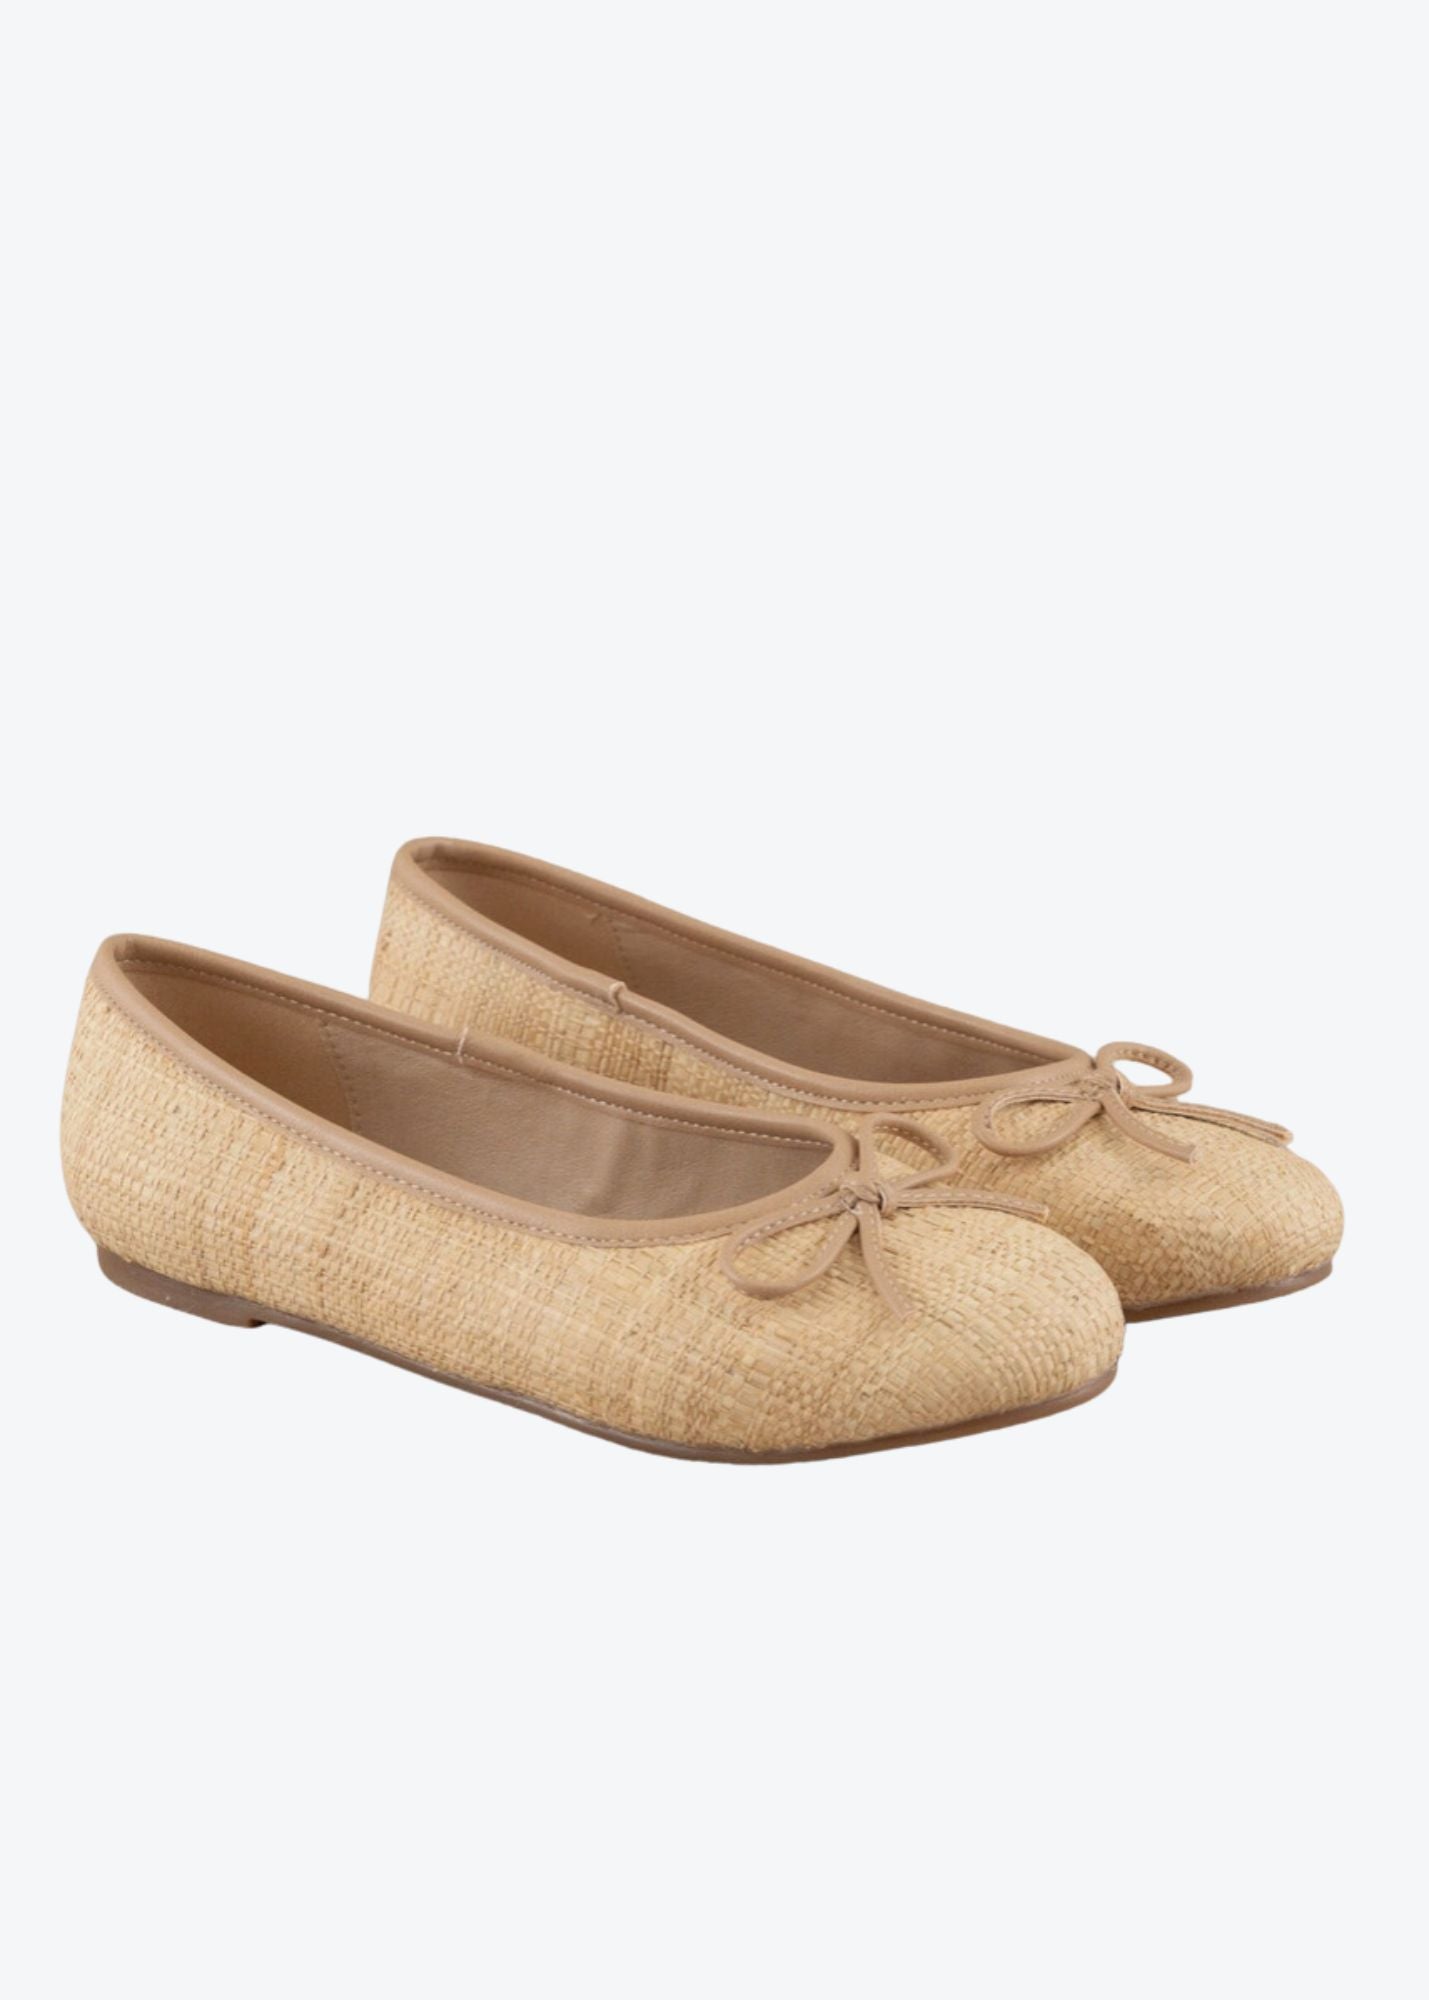 Straw Ballet Flats Shoes